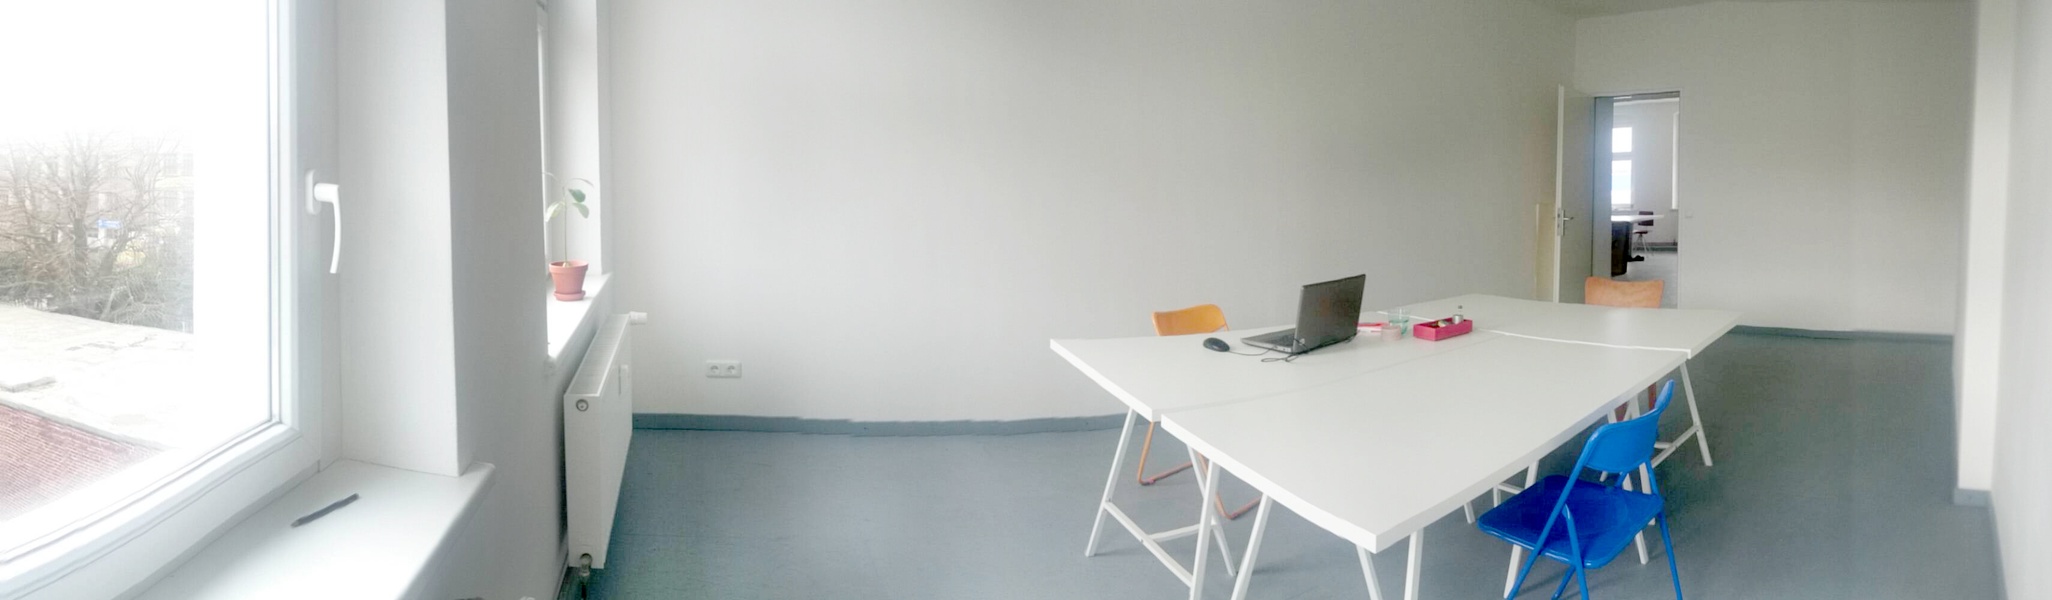 1 desk to let in spacious coworking space